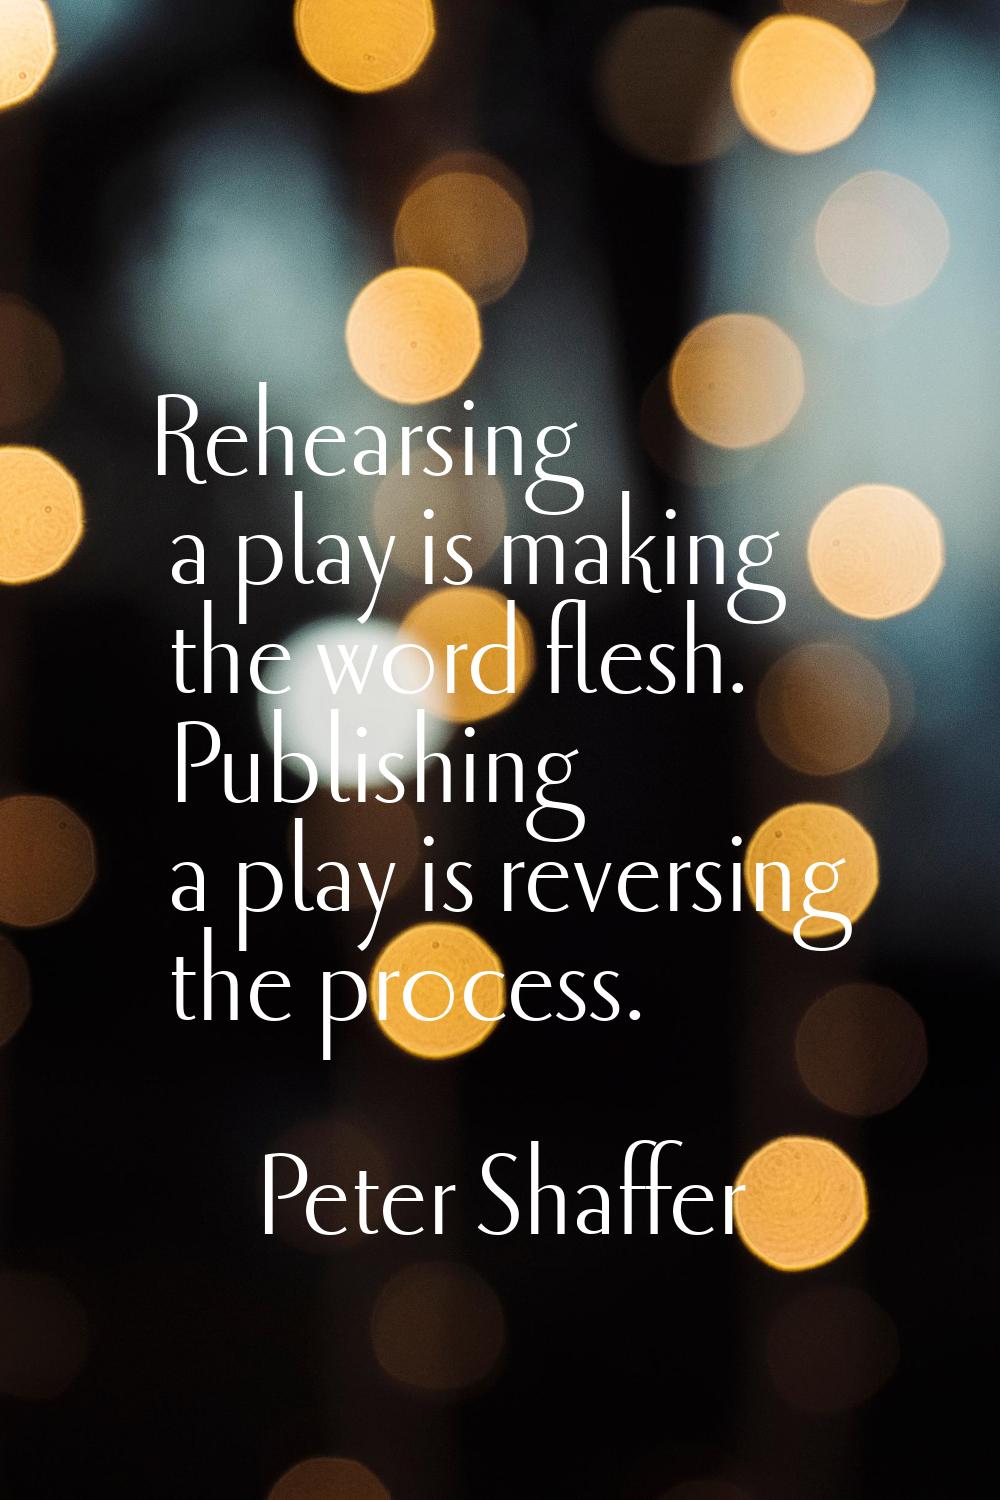 Rehearsing a play is making the word flesh. Publishing a play is reversing the process.